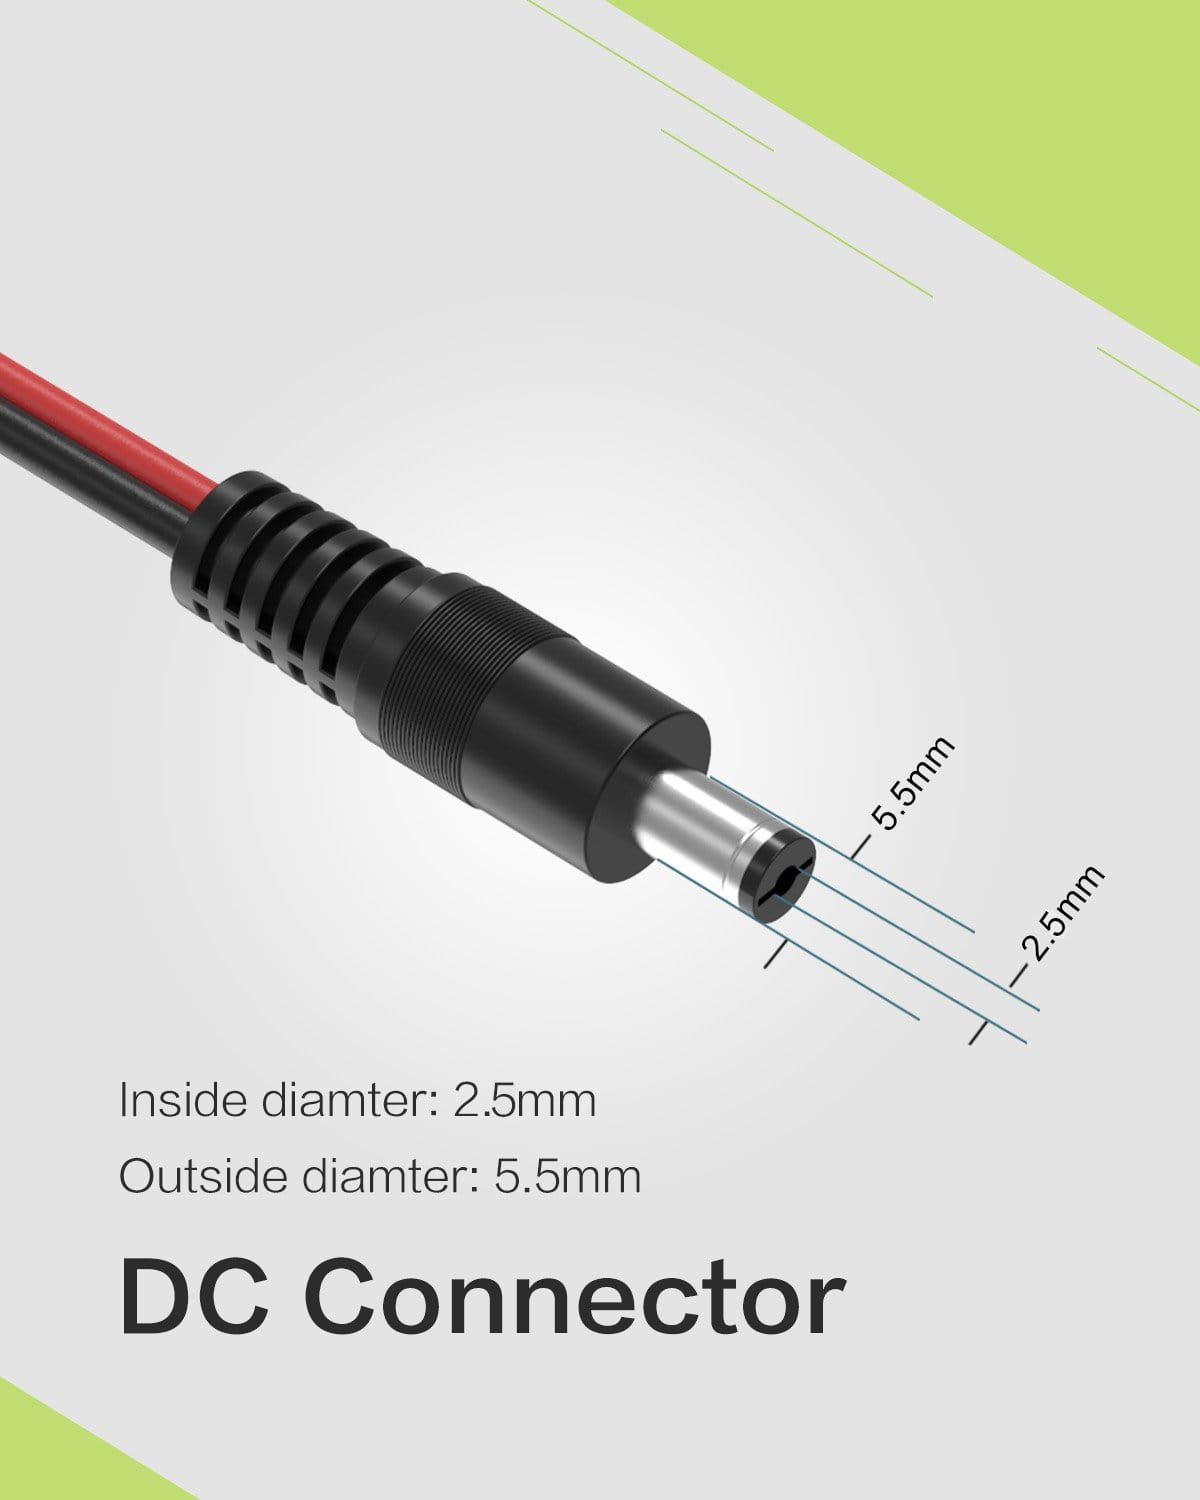 ALLPOWERS DC5525(5.5mm x 2.5mm) to Anderson Connector Adapter Cable